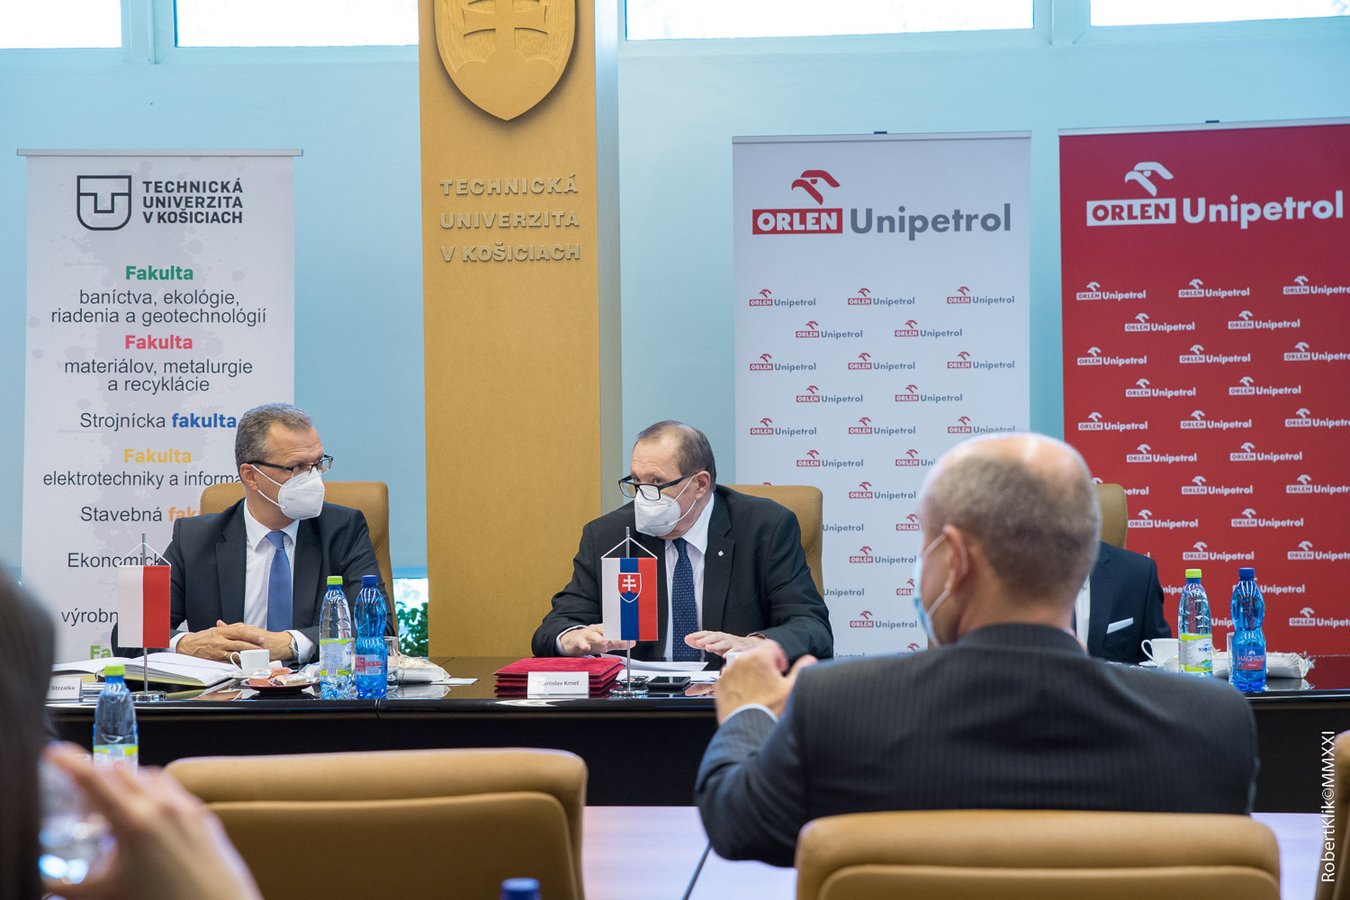 TUKE, ORLEN Unipetrol a.s., and ORLEN Unipetrol Slovakia s. r. o. signed a Memorandum of Understanding and Cooperation